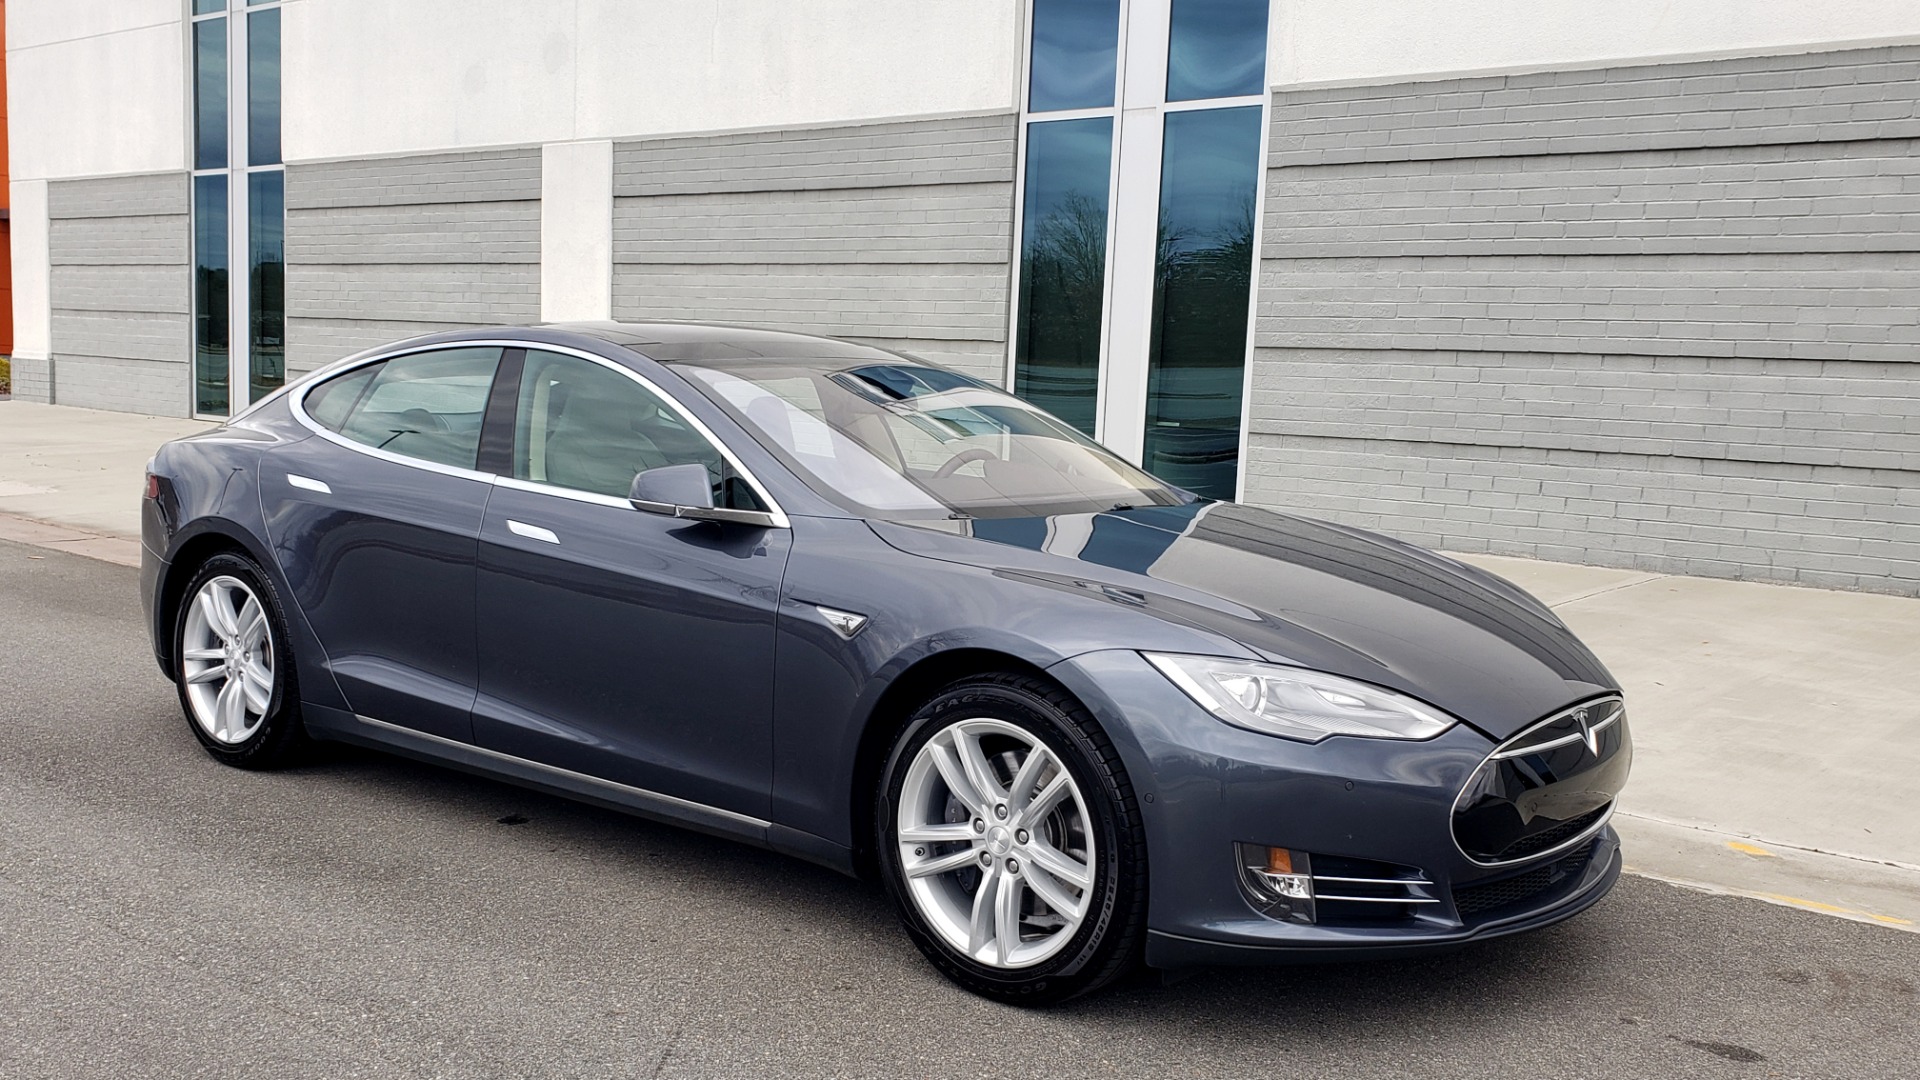 Used Silver 2014 Tesla Model S 4dr Sdn 60 kWh Battery for sale